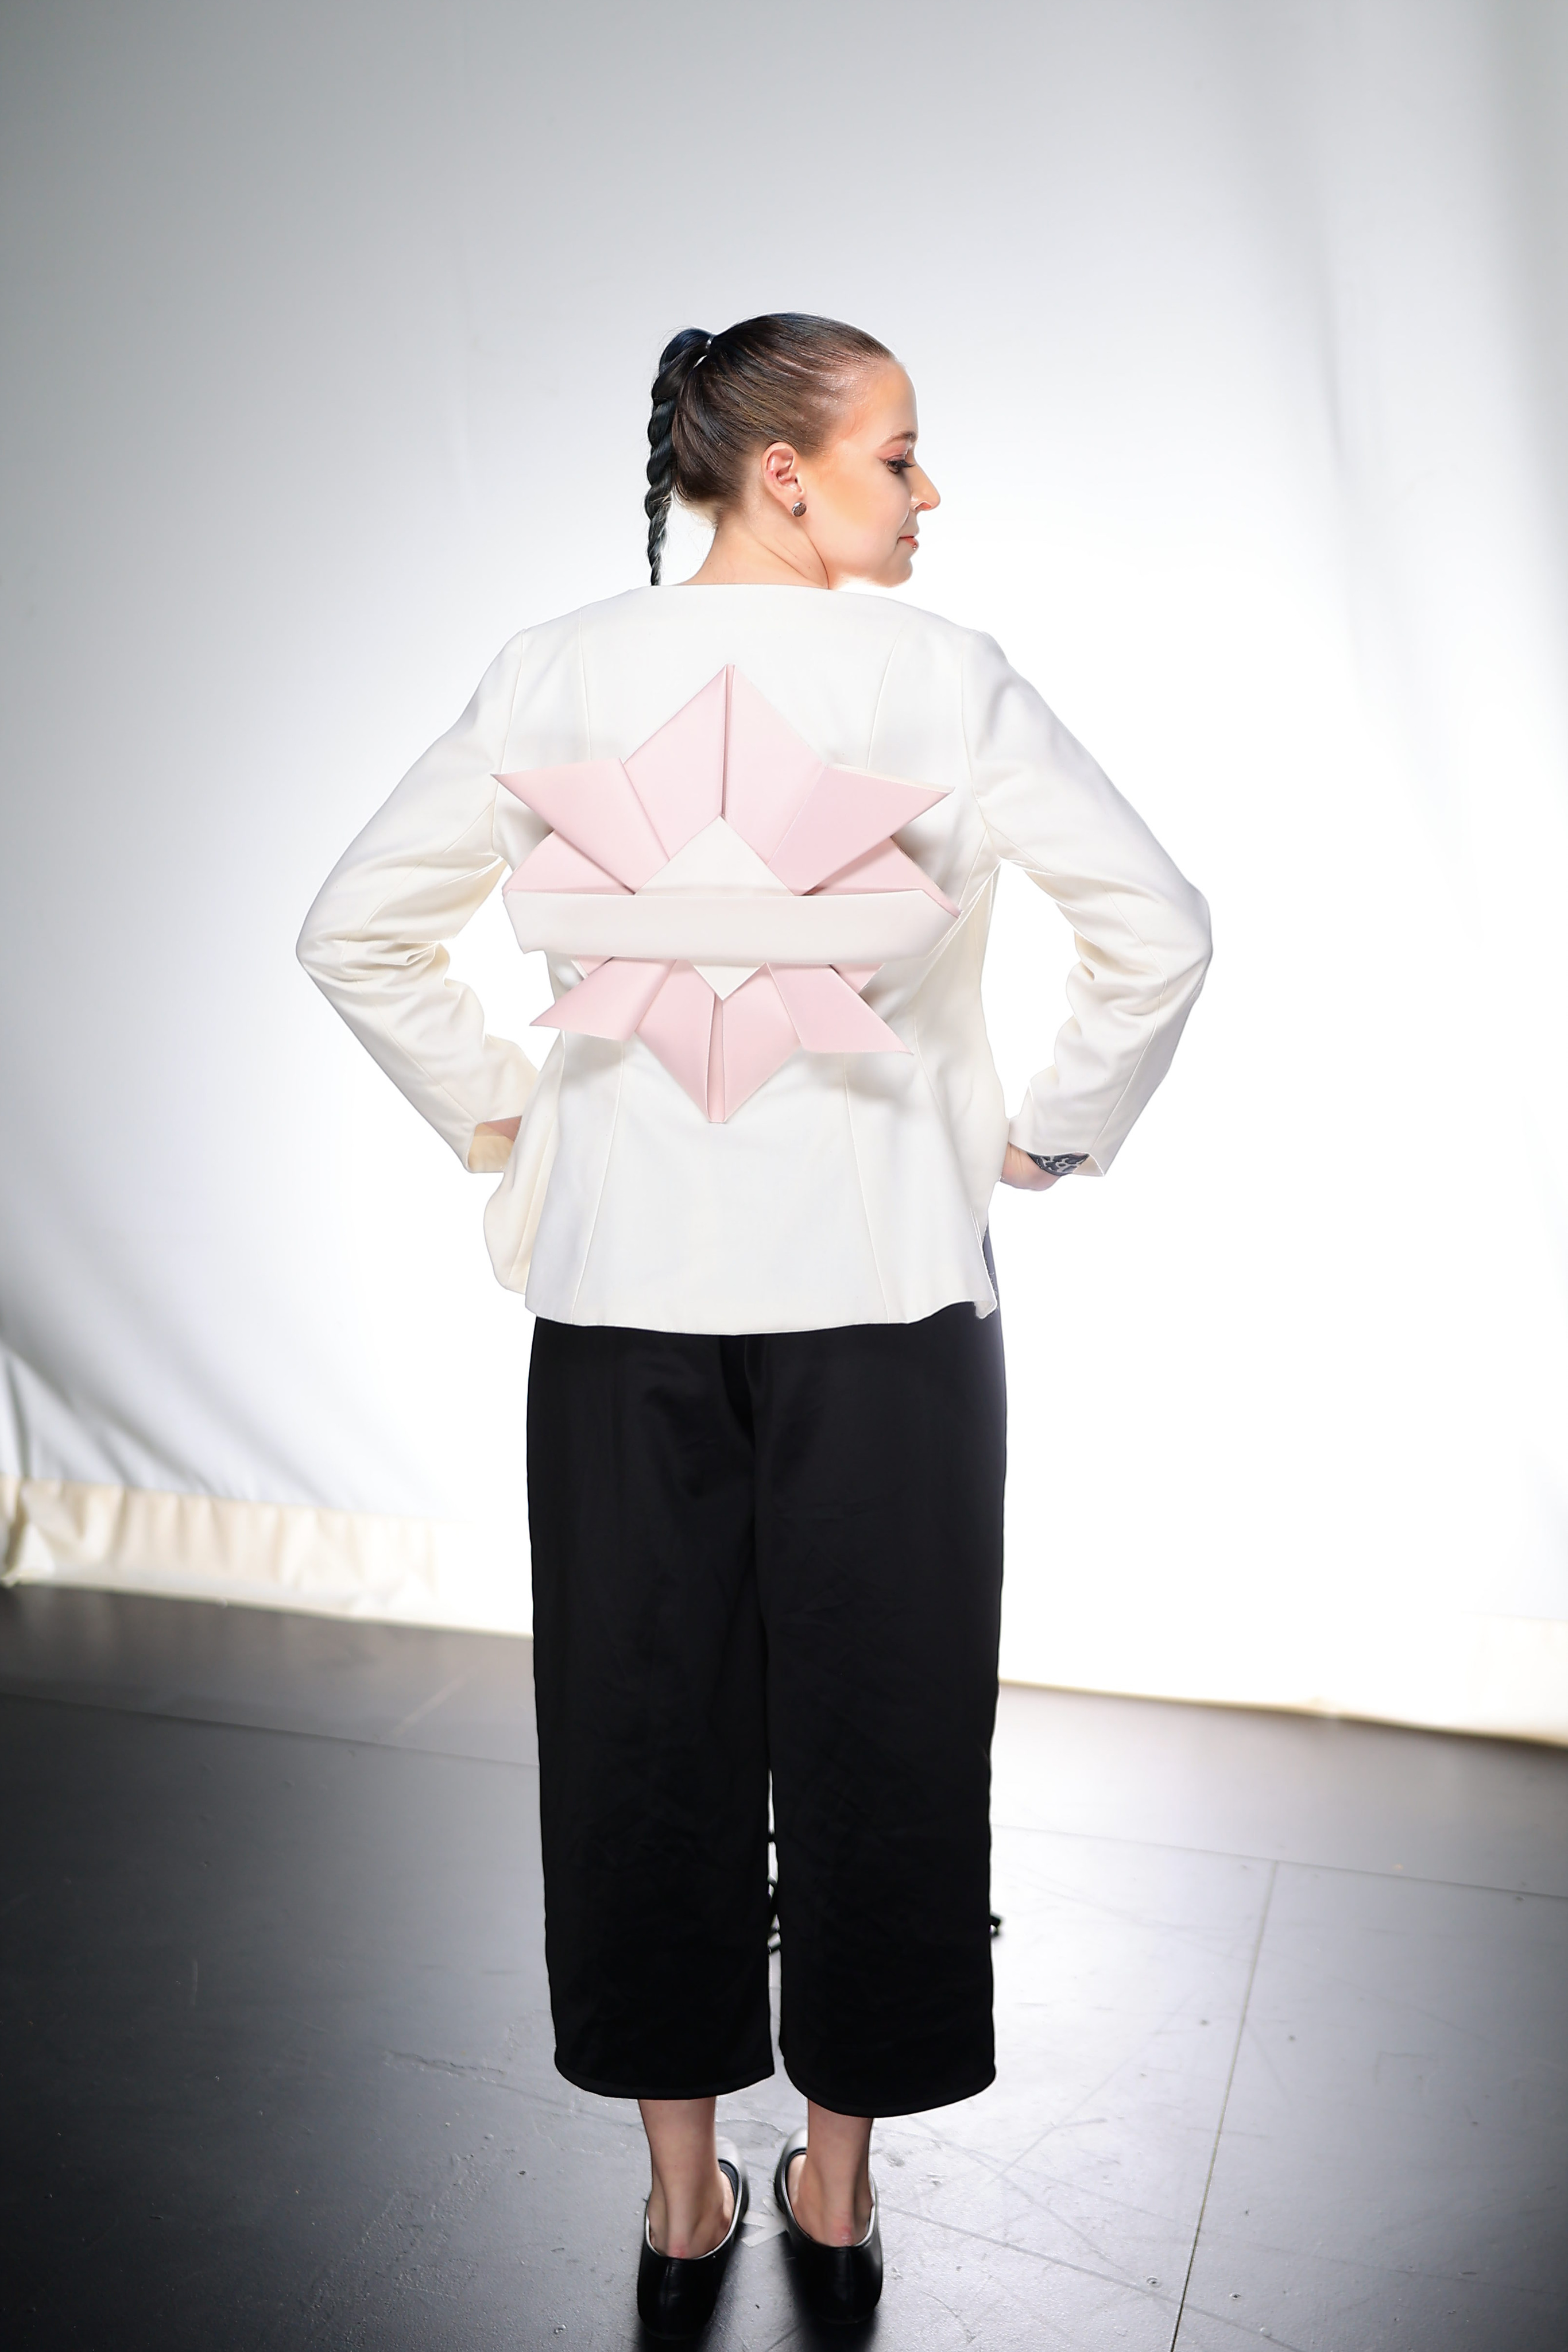 A model posing with their back to us. The model is wearing a white long-sleeved blazer with a pink and white origami design oversized black capris with black flats.